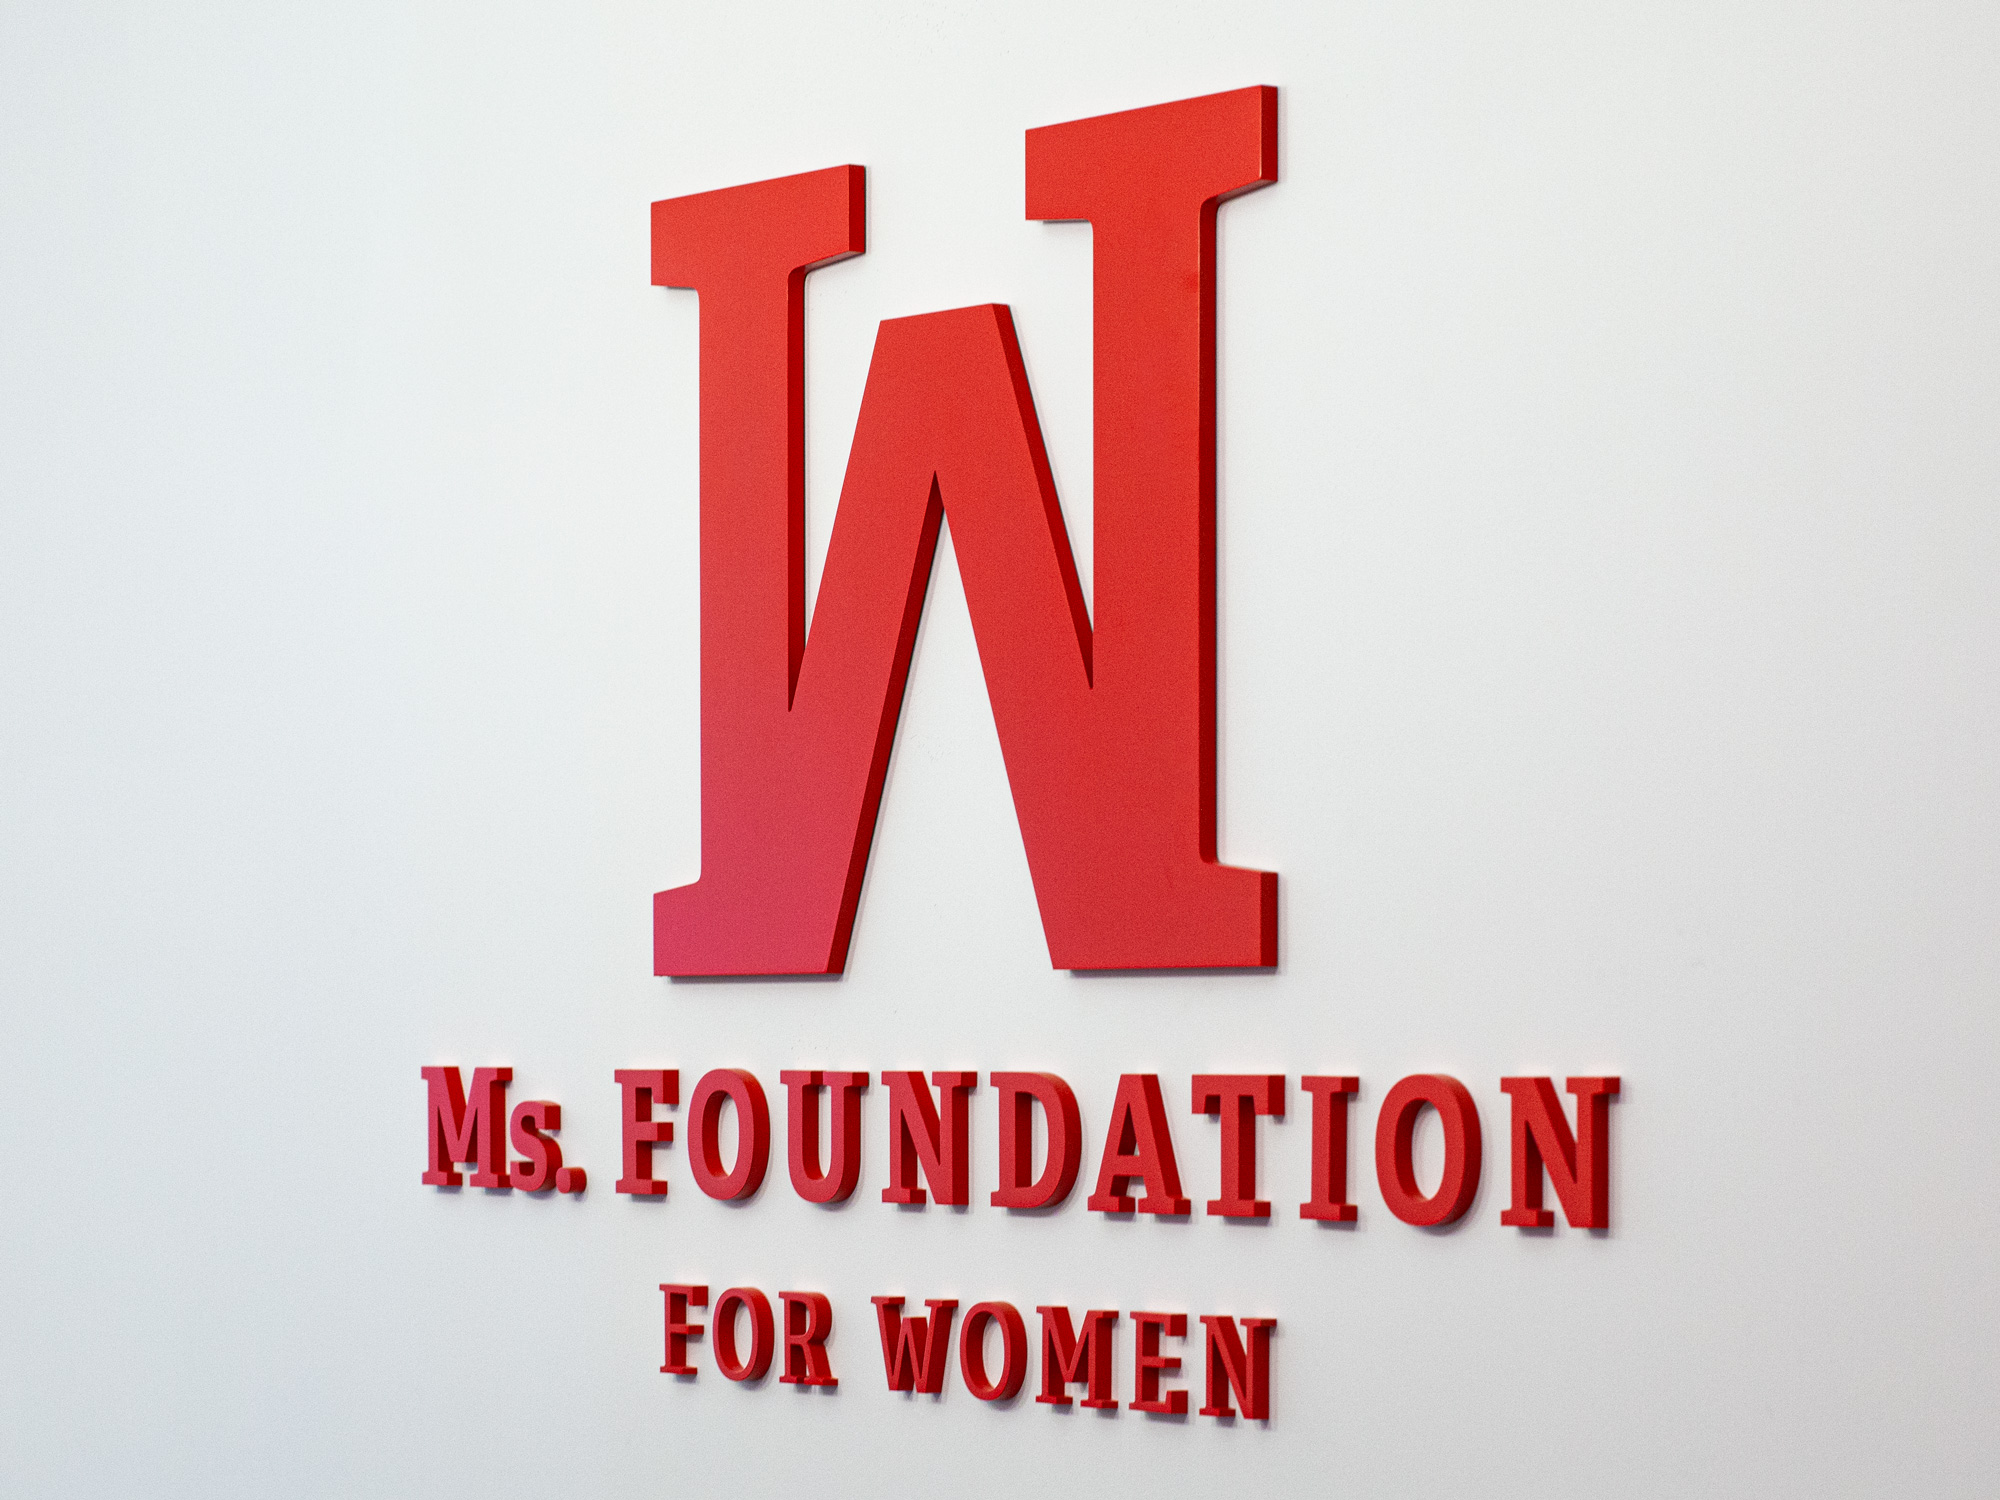 Wall graphics for Ms. Foundation for Women